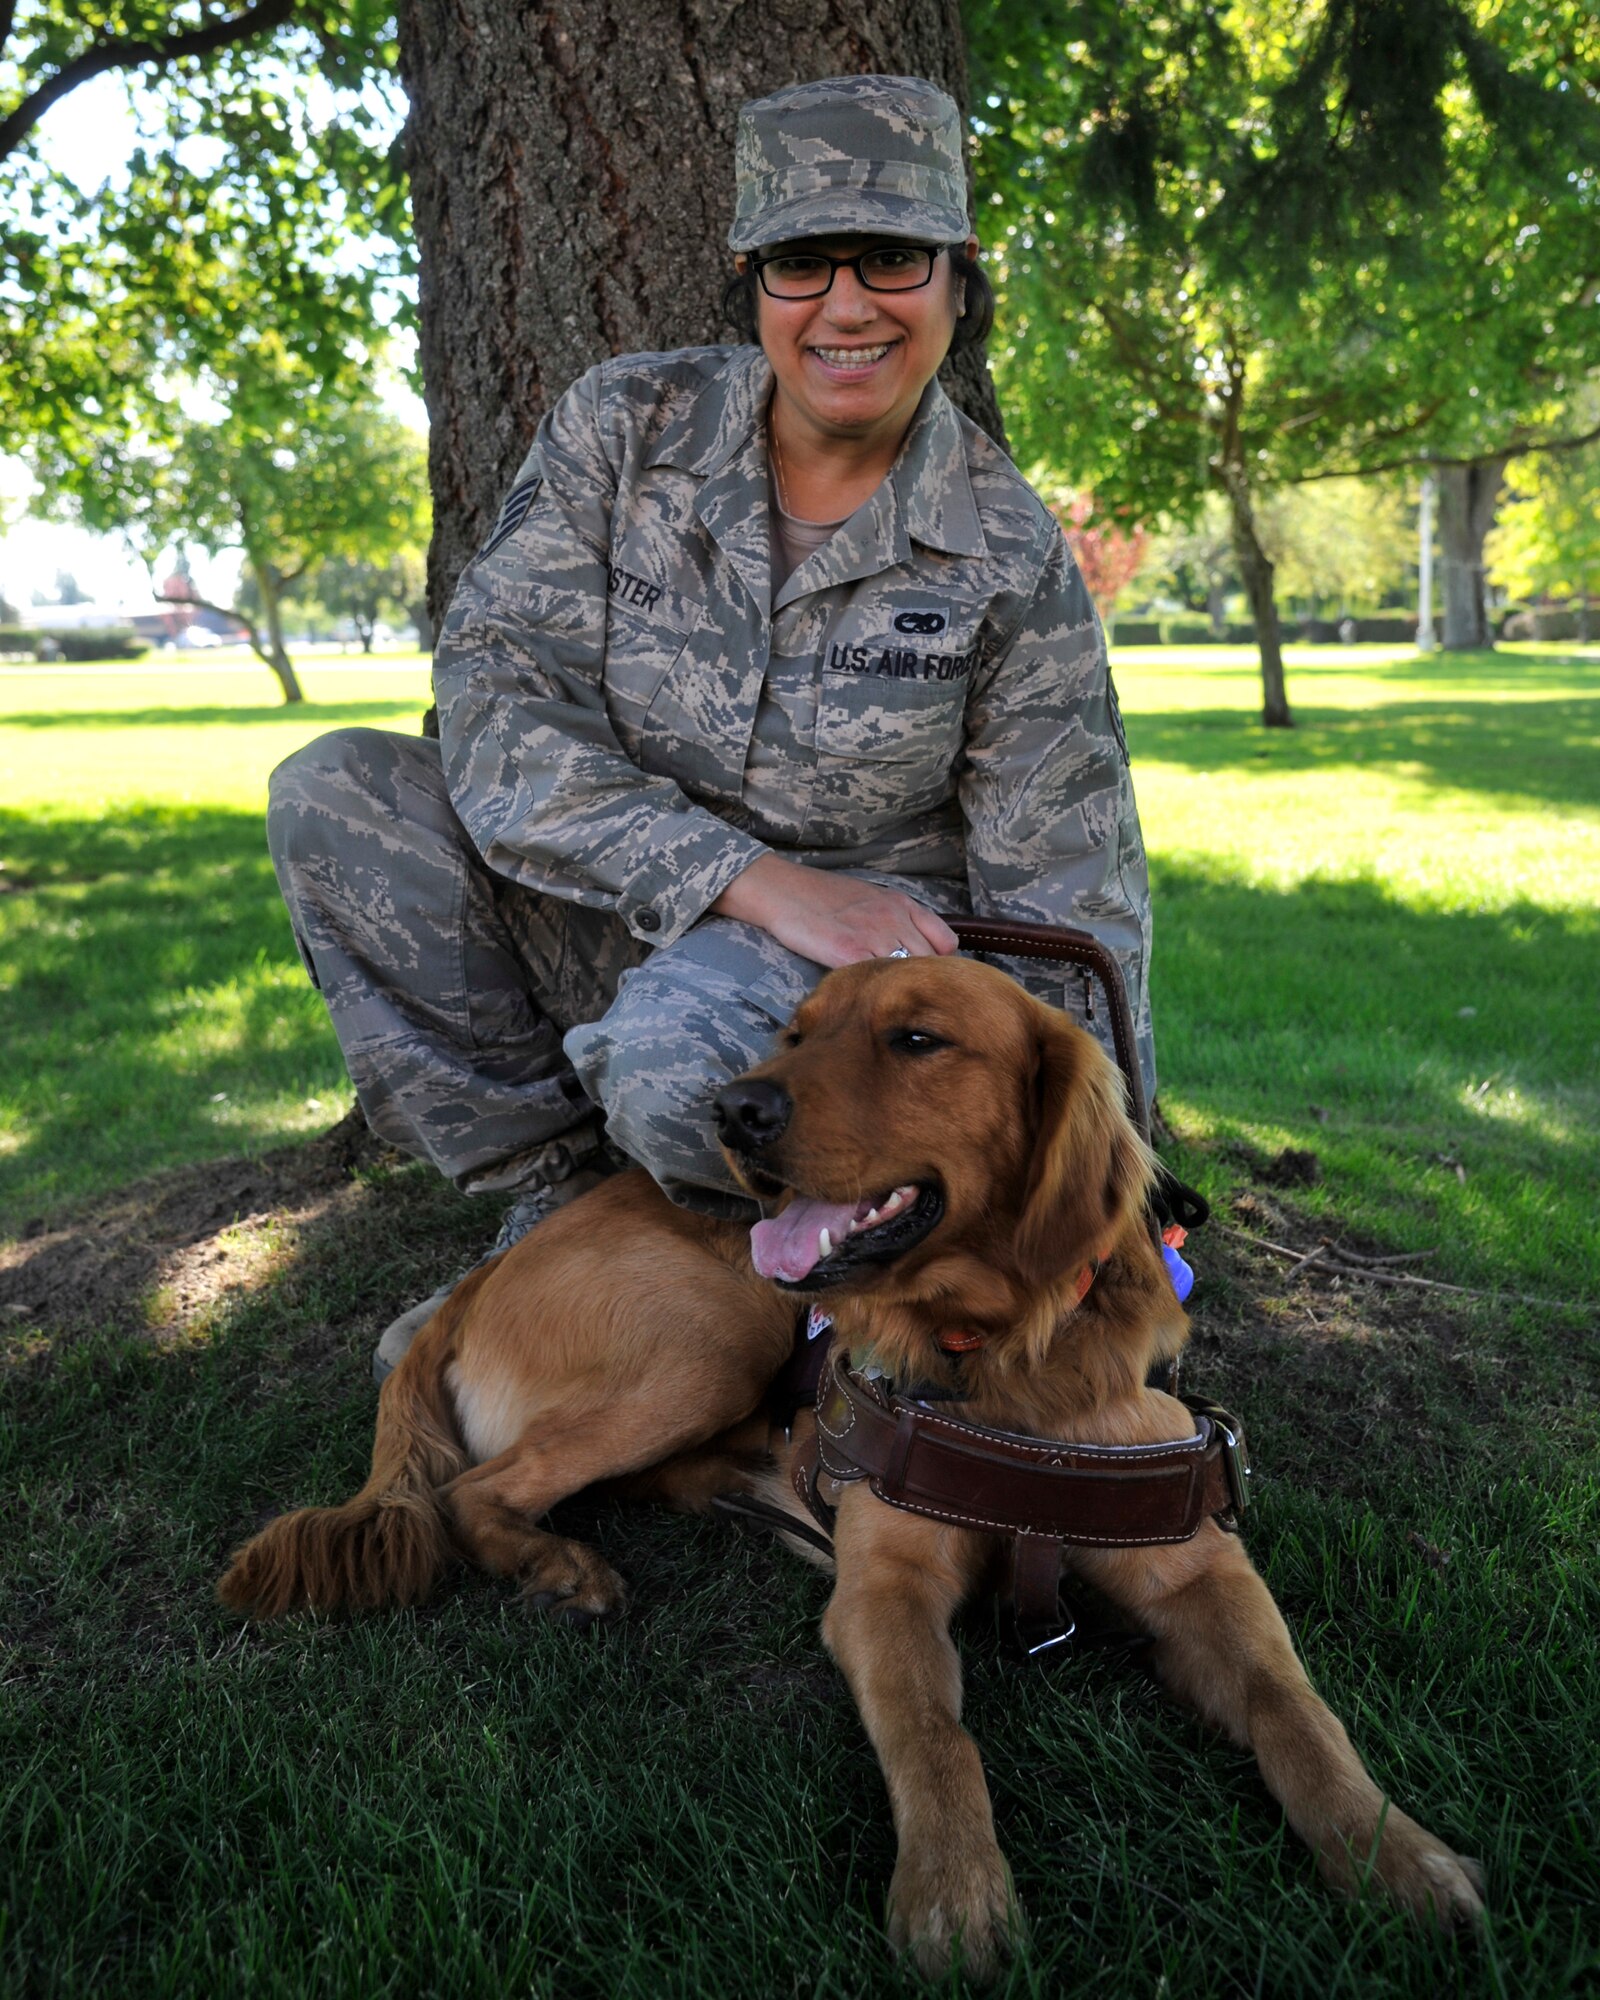 Staff Sgt. Abigail Foster, Phoenix Star program member, poses with her golden retriever, Luke, at Fairchild Air Force Base, Wash., Sept. 12, 2013. The Phoenix Star program is designed to facilitate Airmen's transition into the civilian lifestyle. (U.S. Air Force photo by Senior Airman Mary O'Dell/Released)